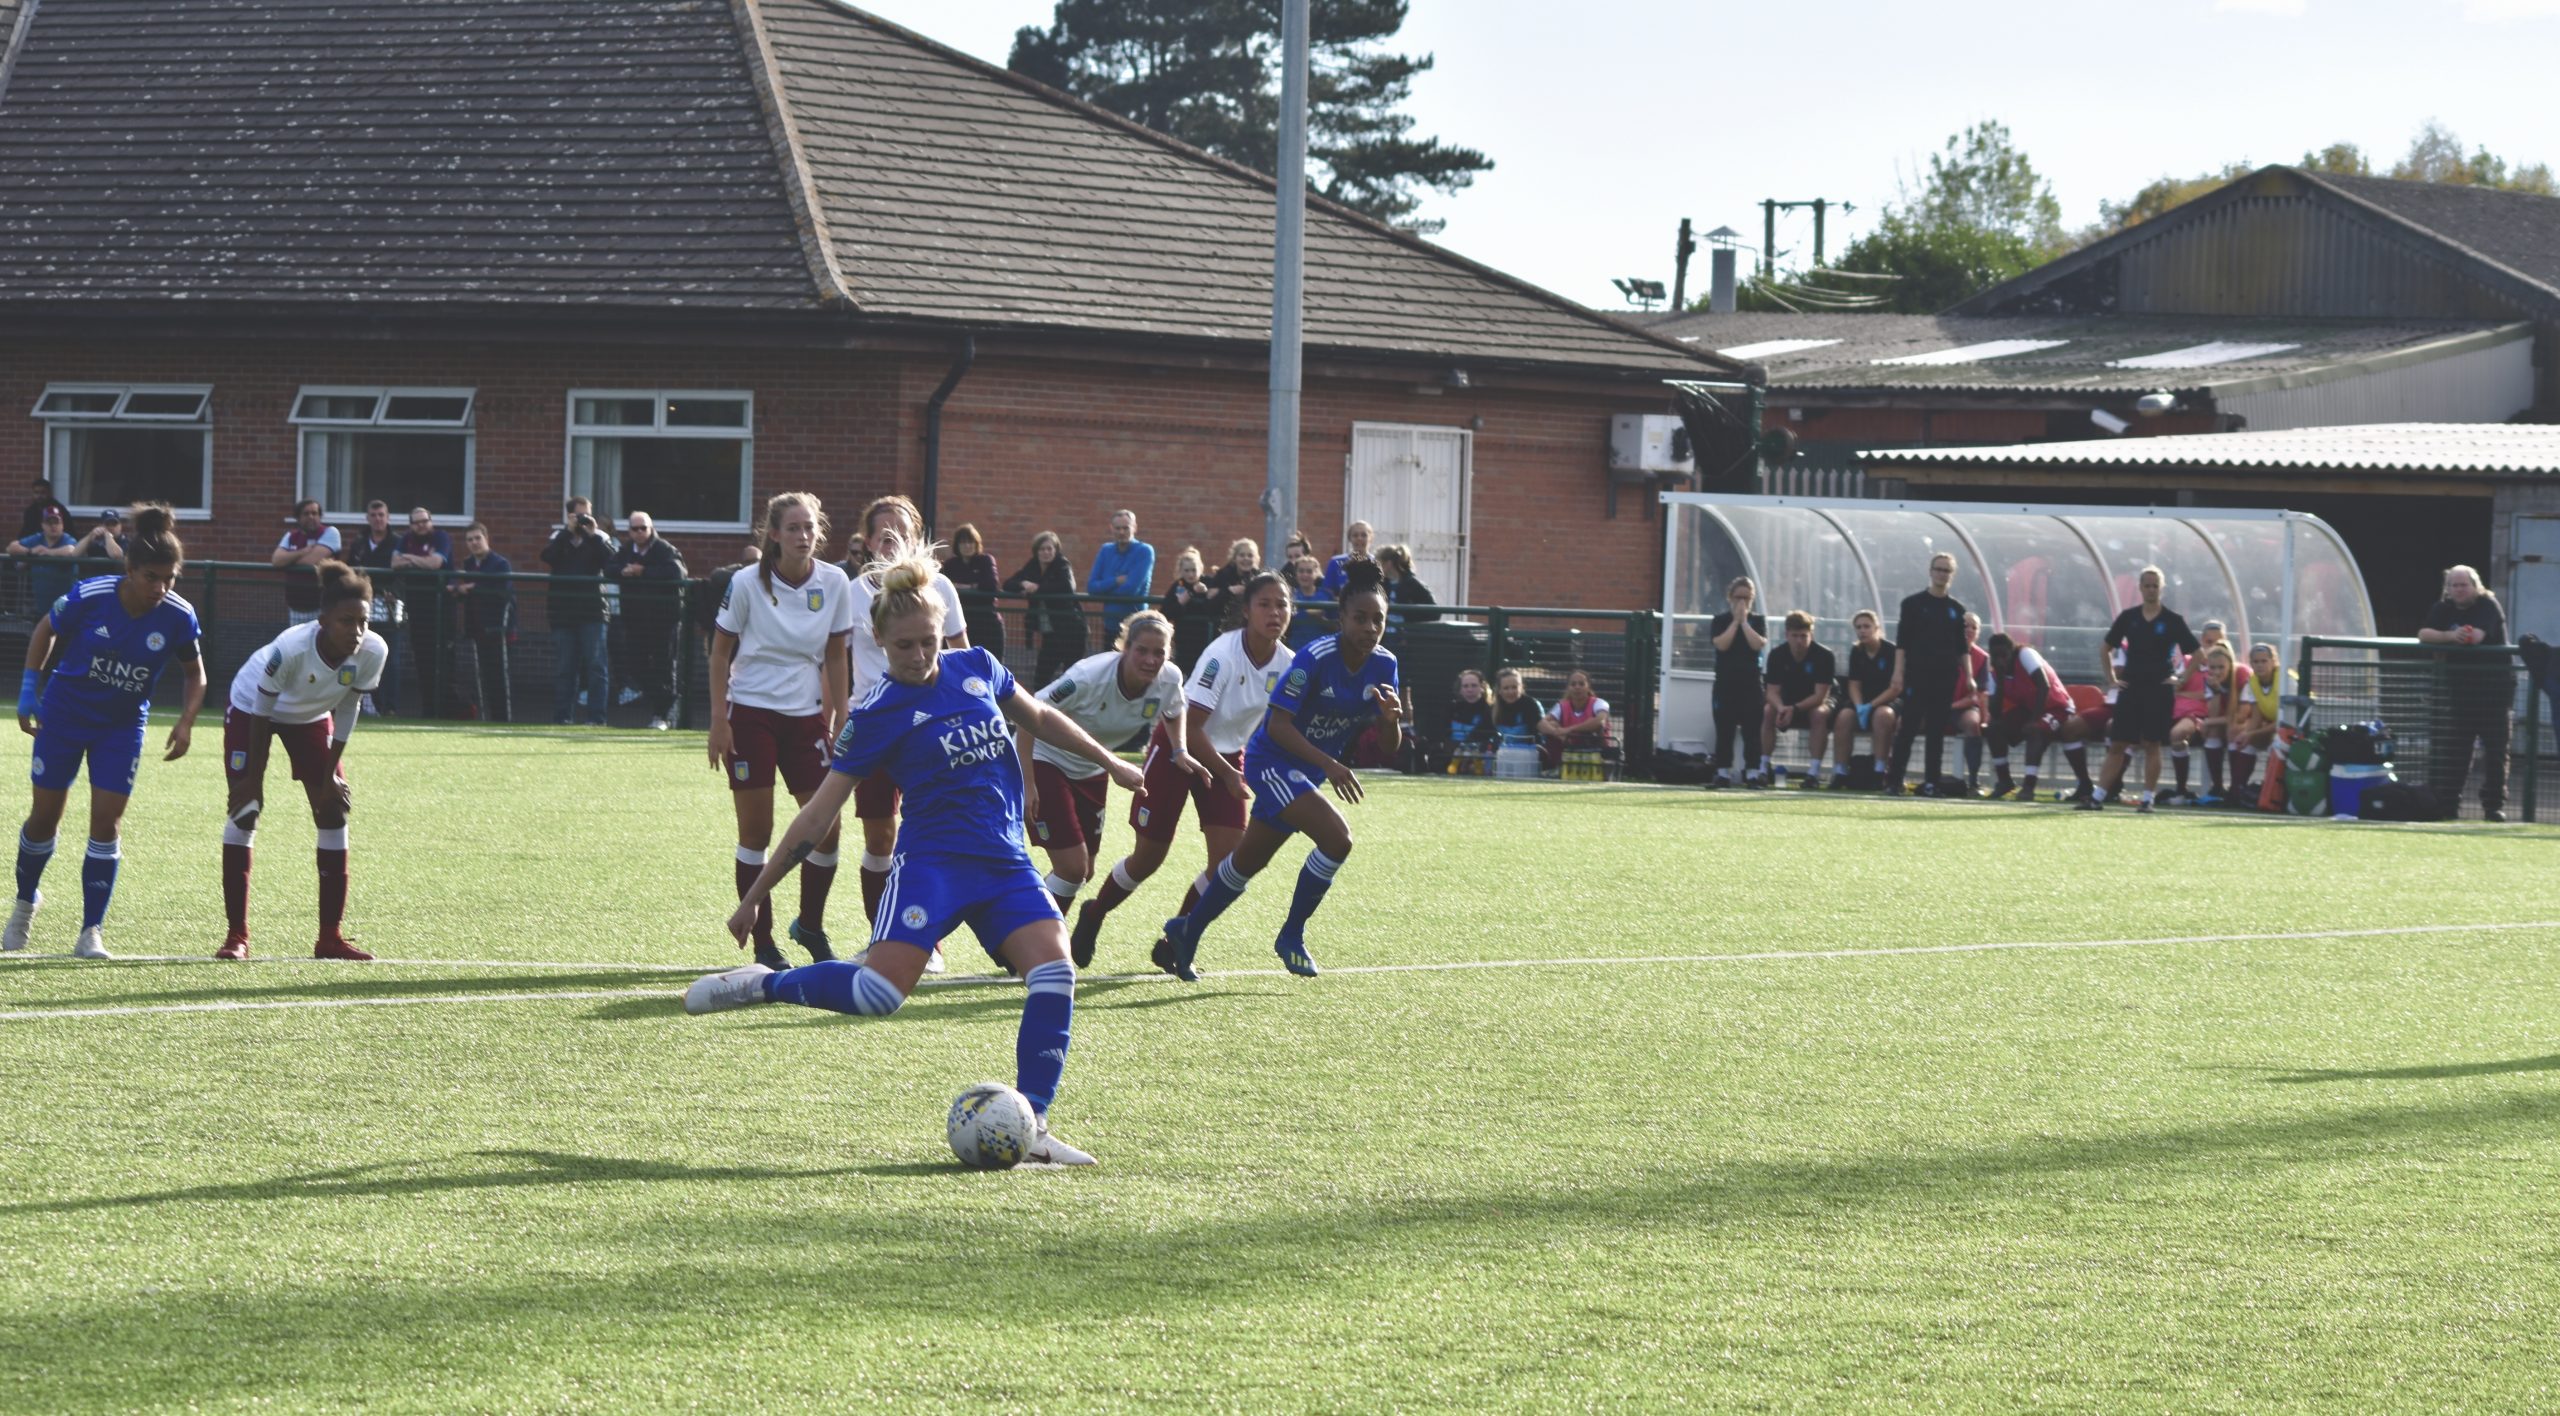 Rosie Axten provided an outlet on the wings for the Foxes and was on hand to calmly slot home from the penalty spot to net her fourth goal in the past three games.